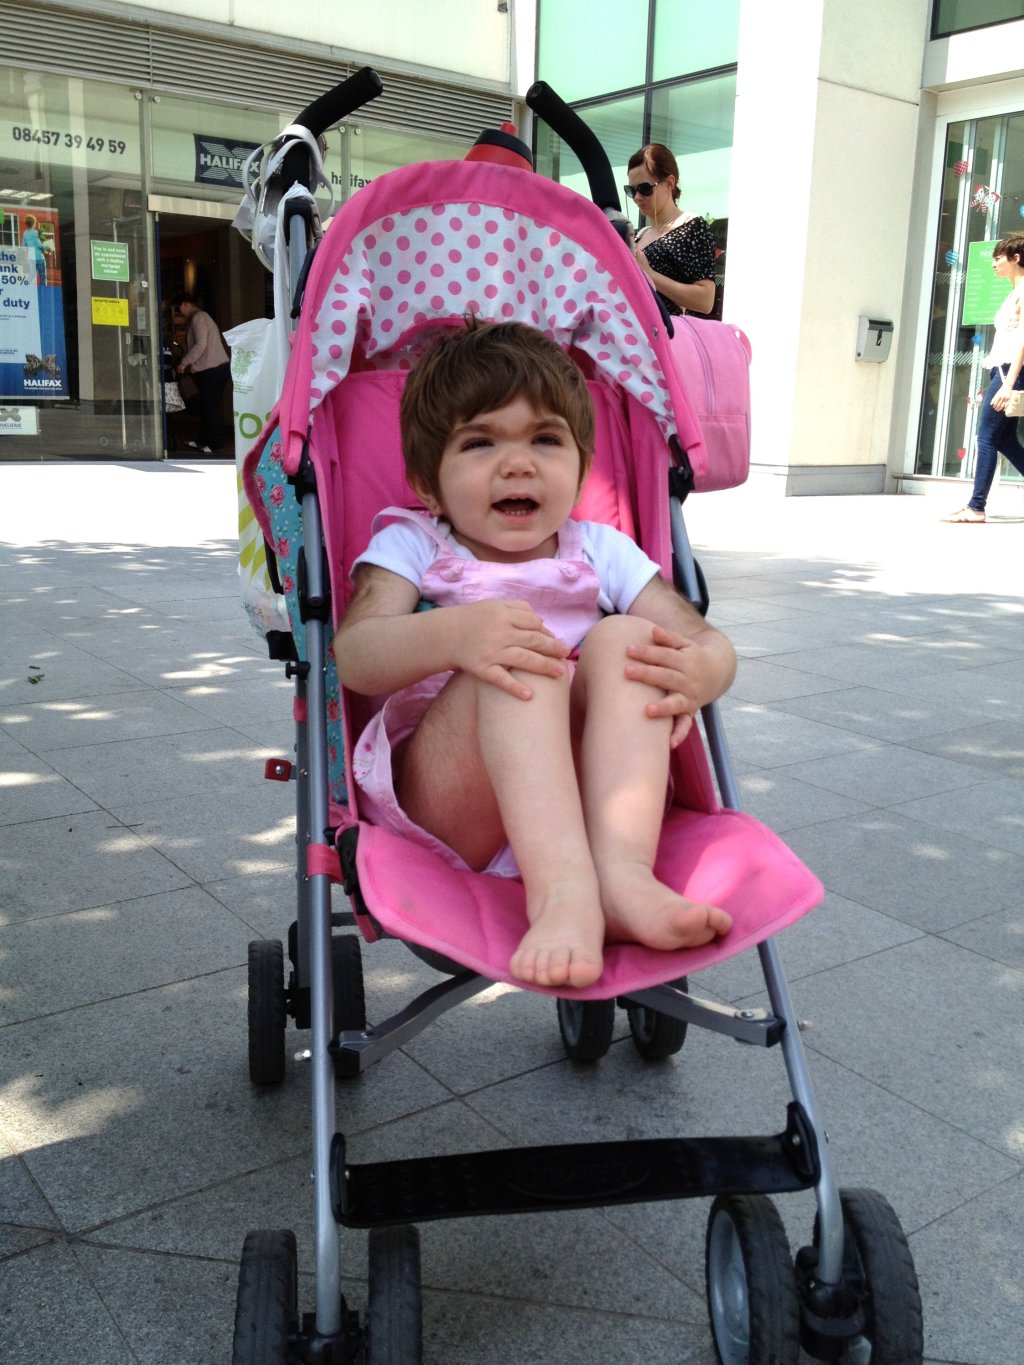 A young girl with MPS I Hurler sits in a pink pram with her knees tucked into her chest and an open smile on her face.